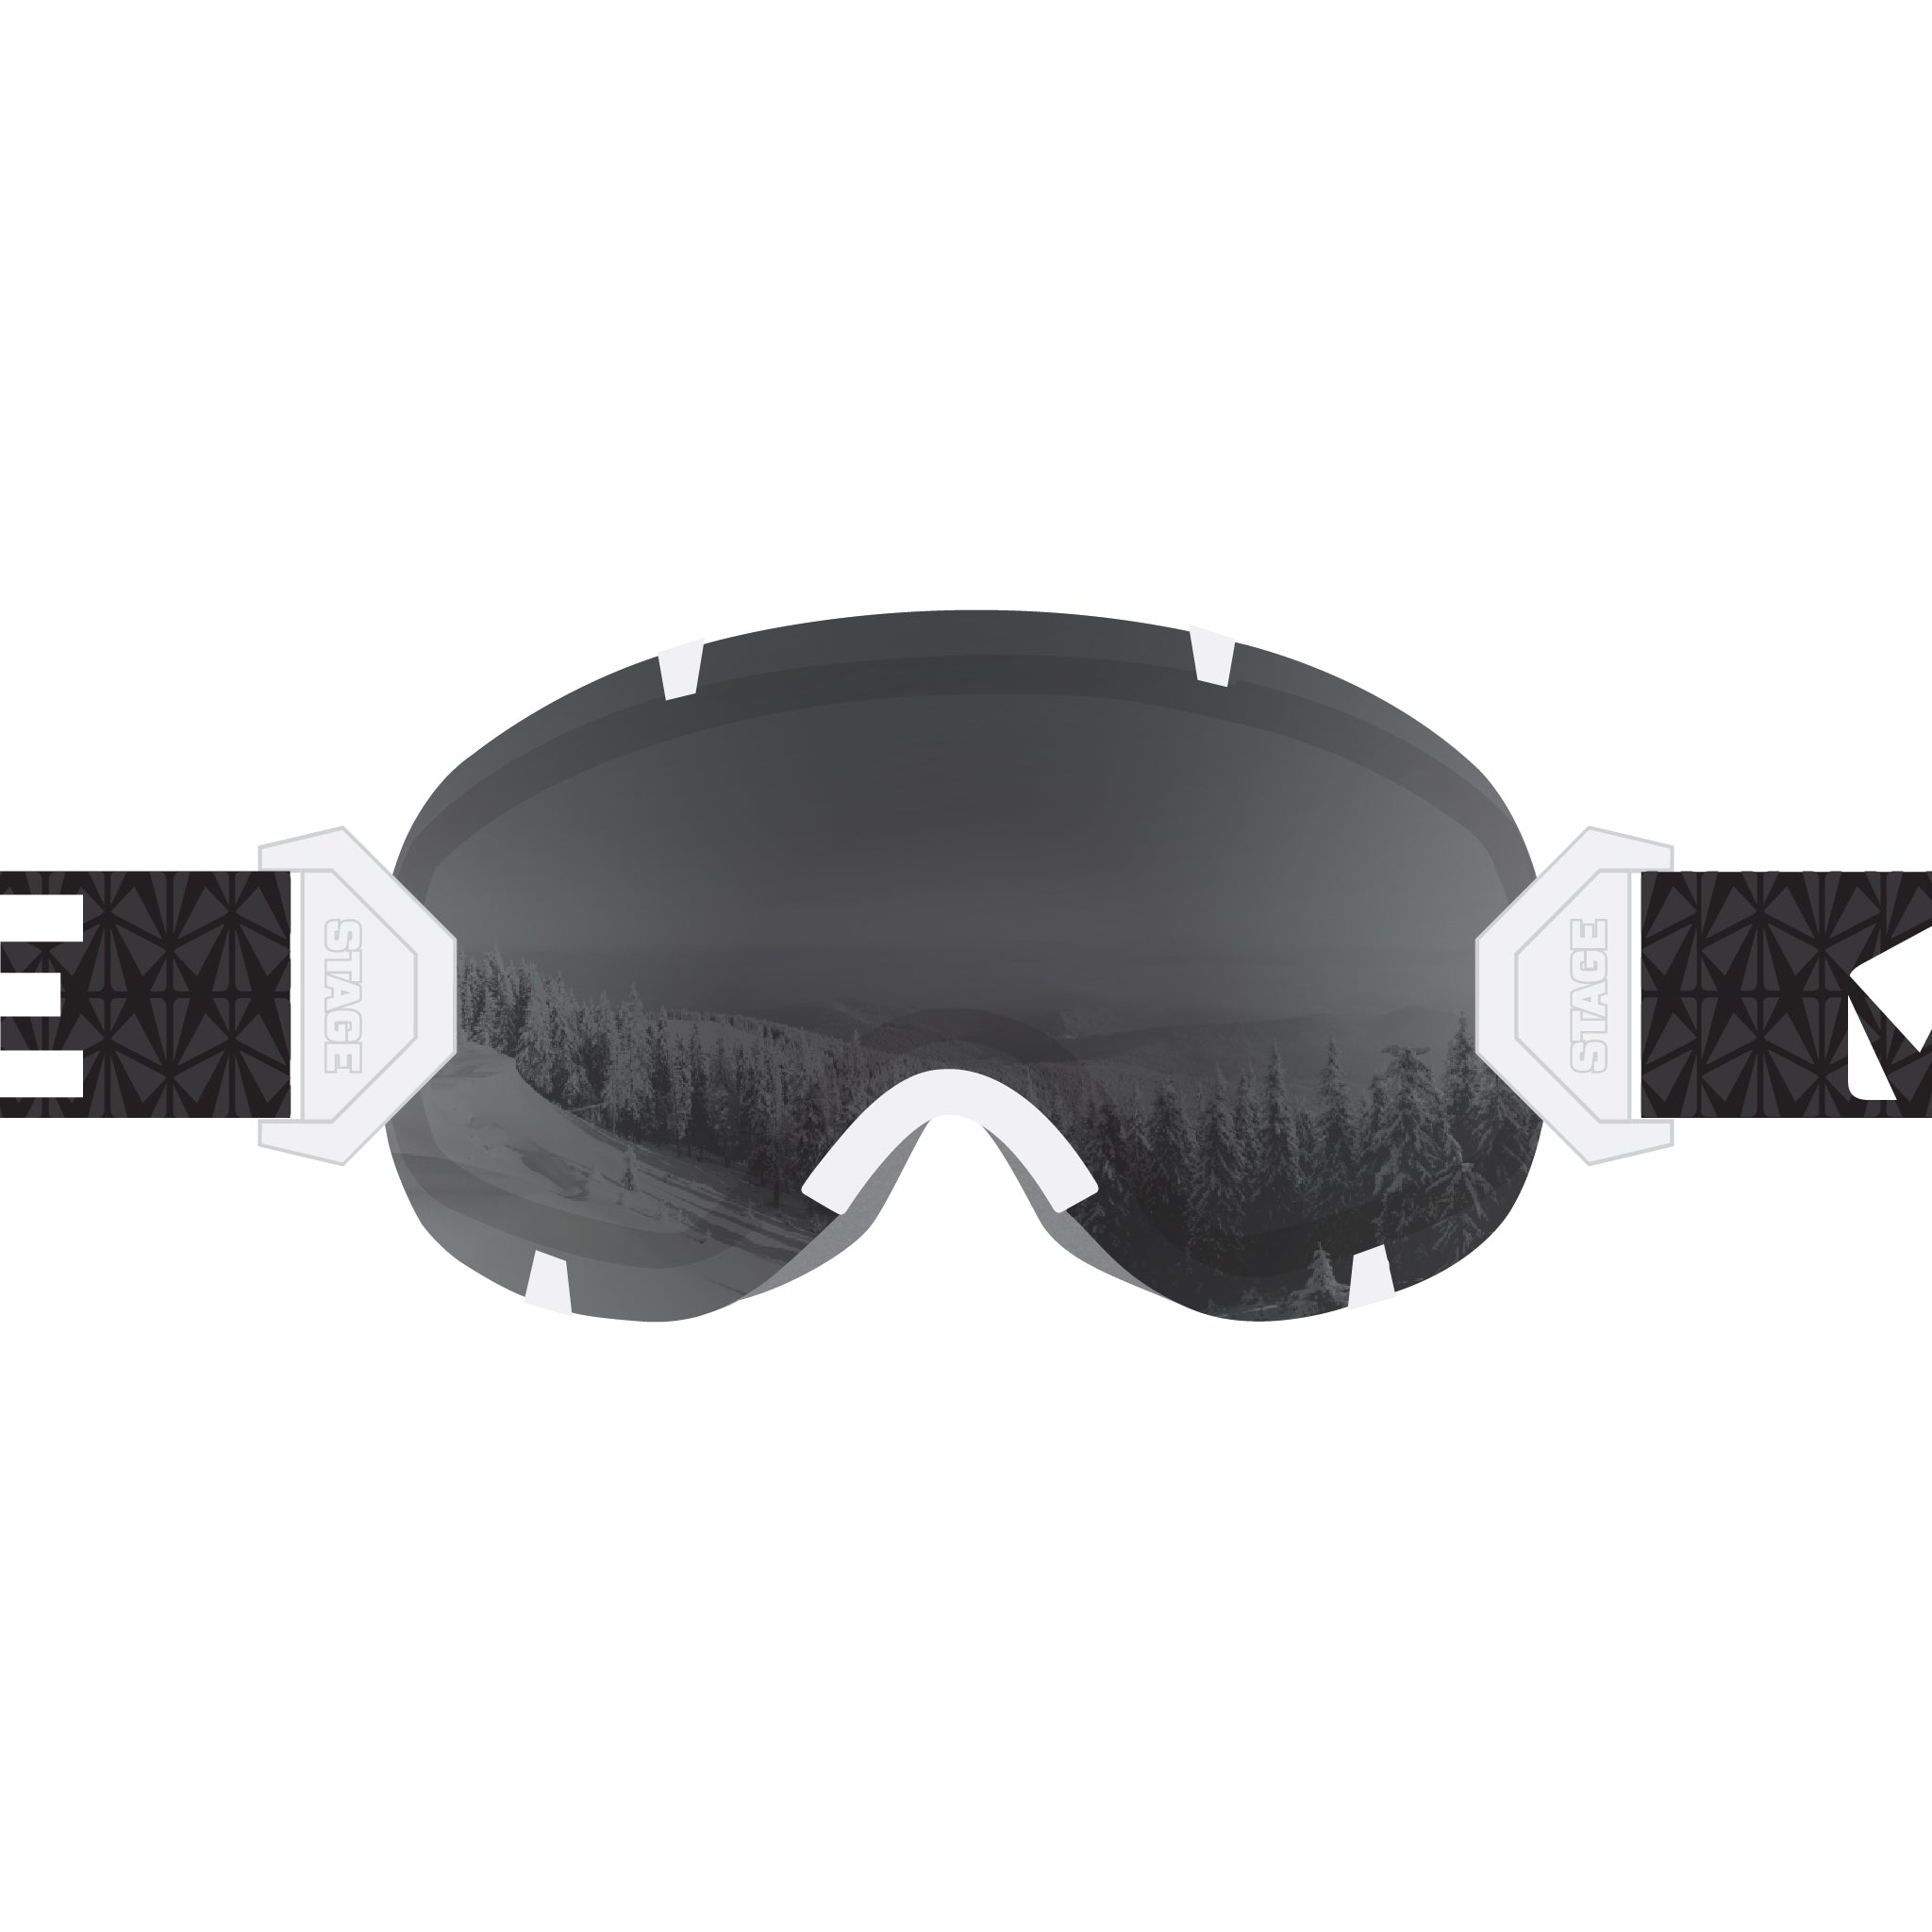 STAGE Black and Strap Ski - Stunt Interchangeable Goggle Lens -